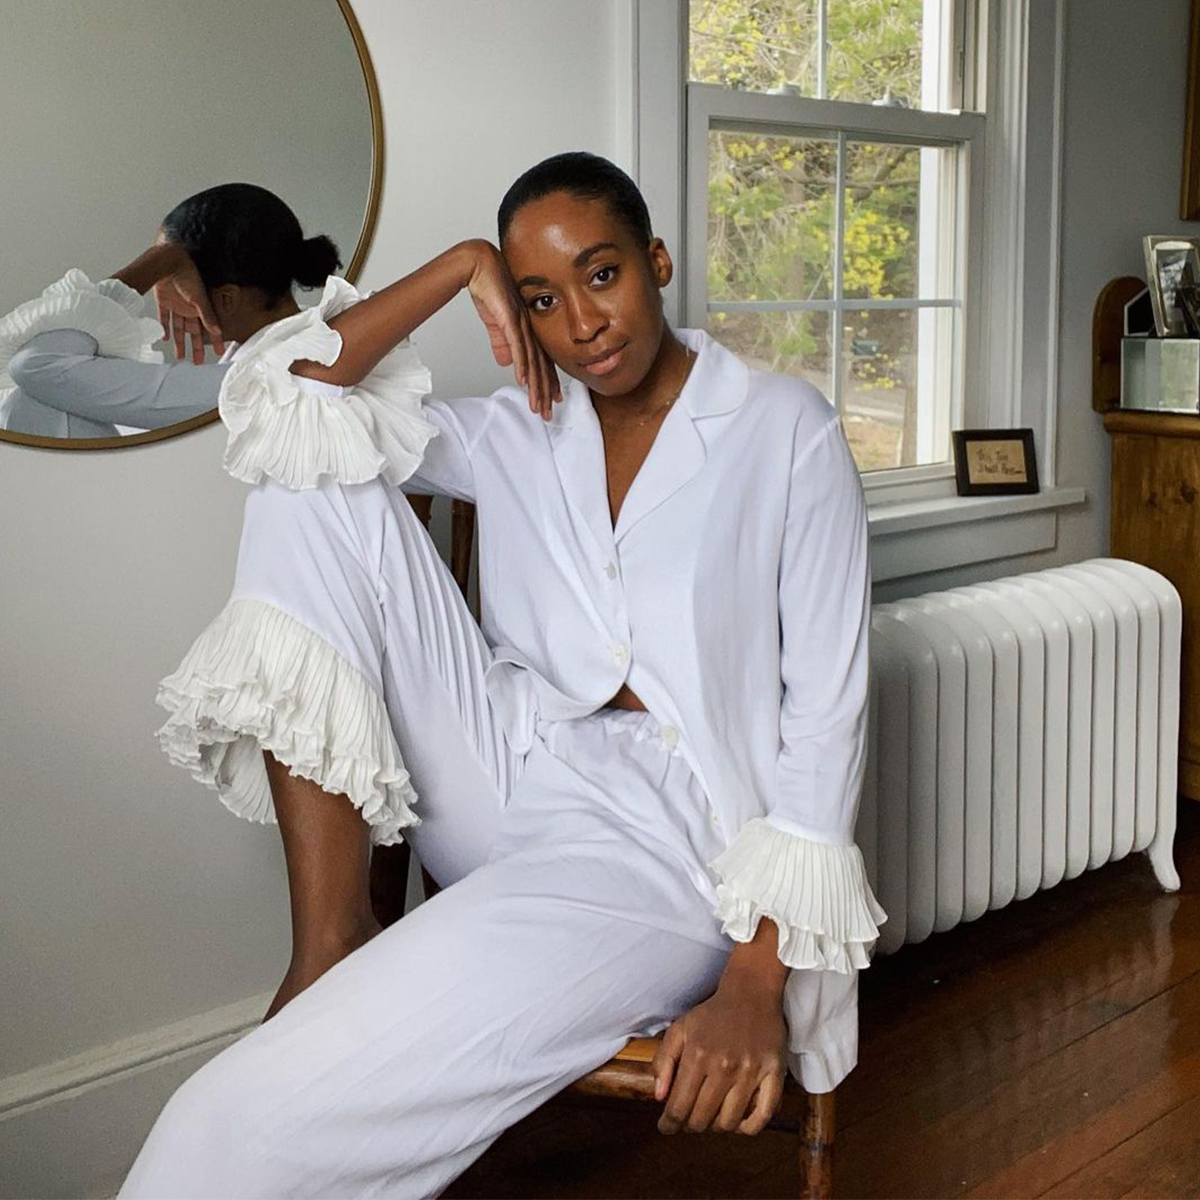 Cute Women's Pajama Sets: How to Choose the Best Pajamas for